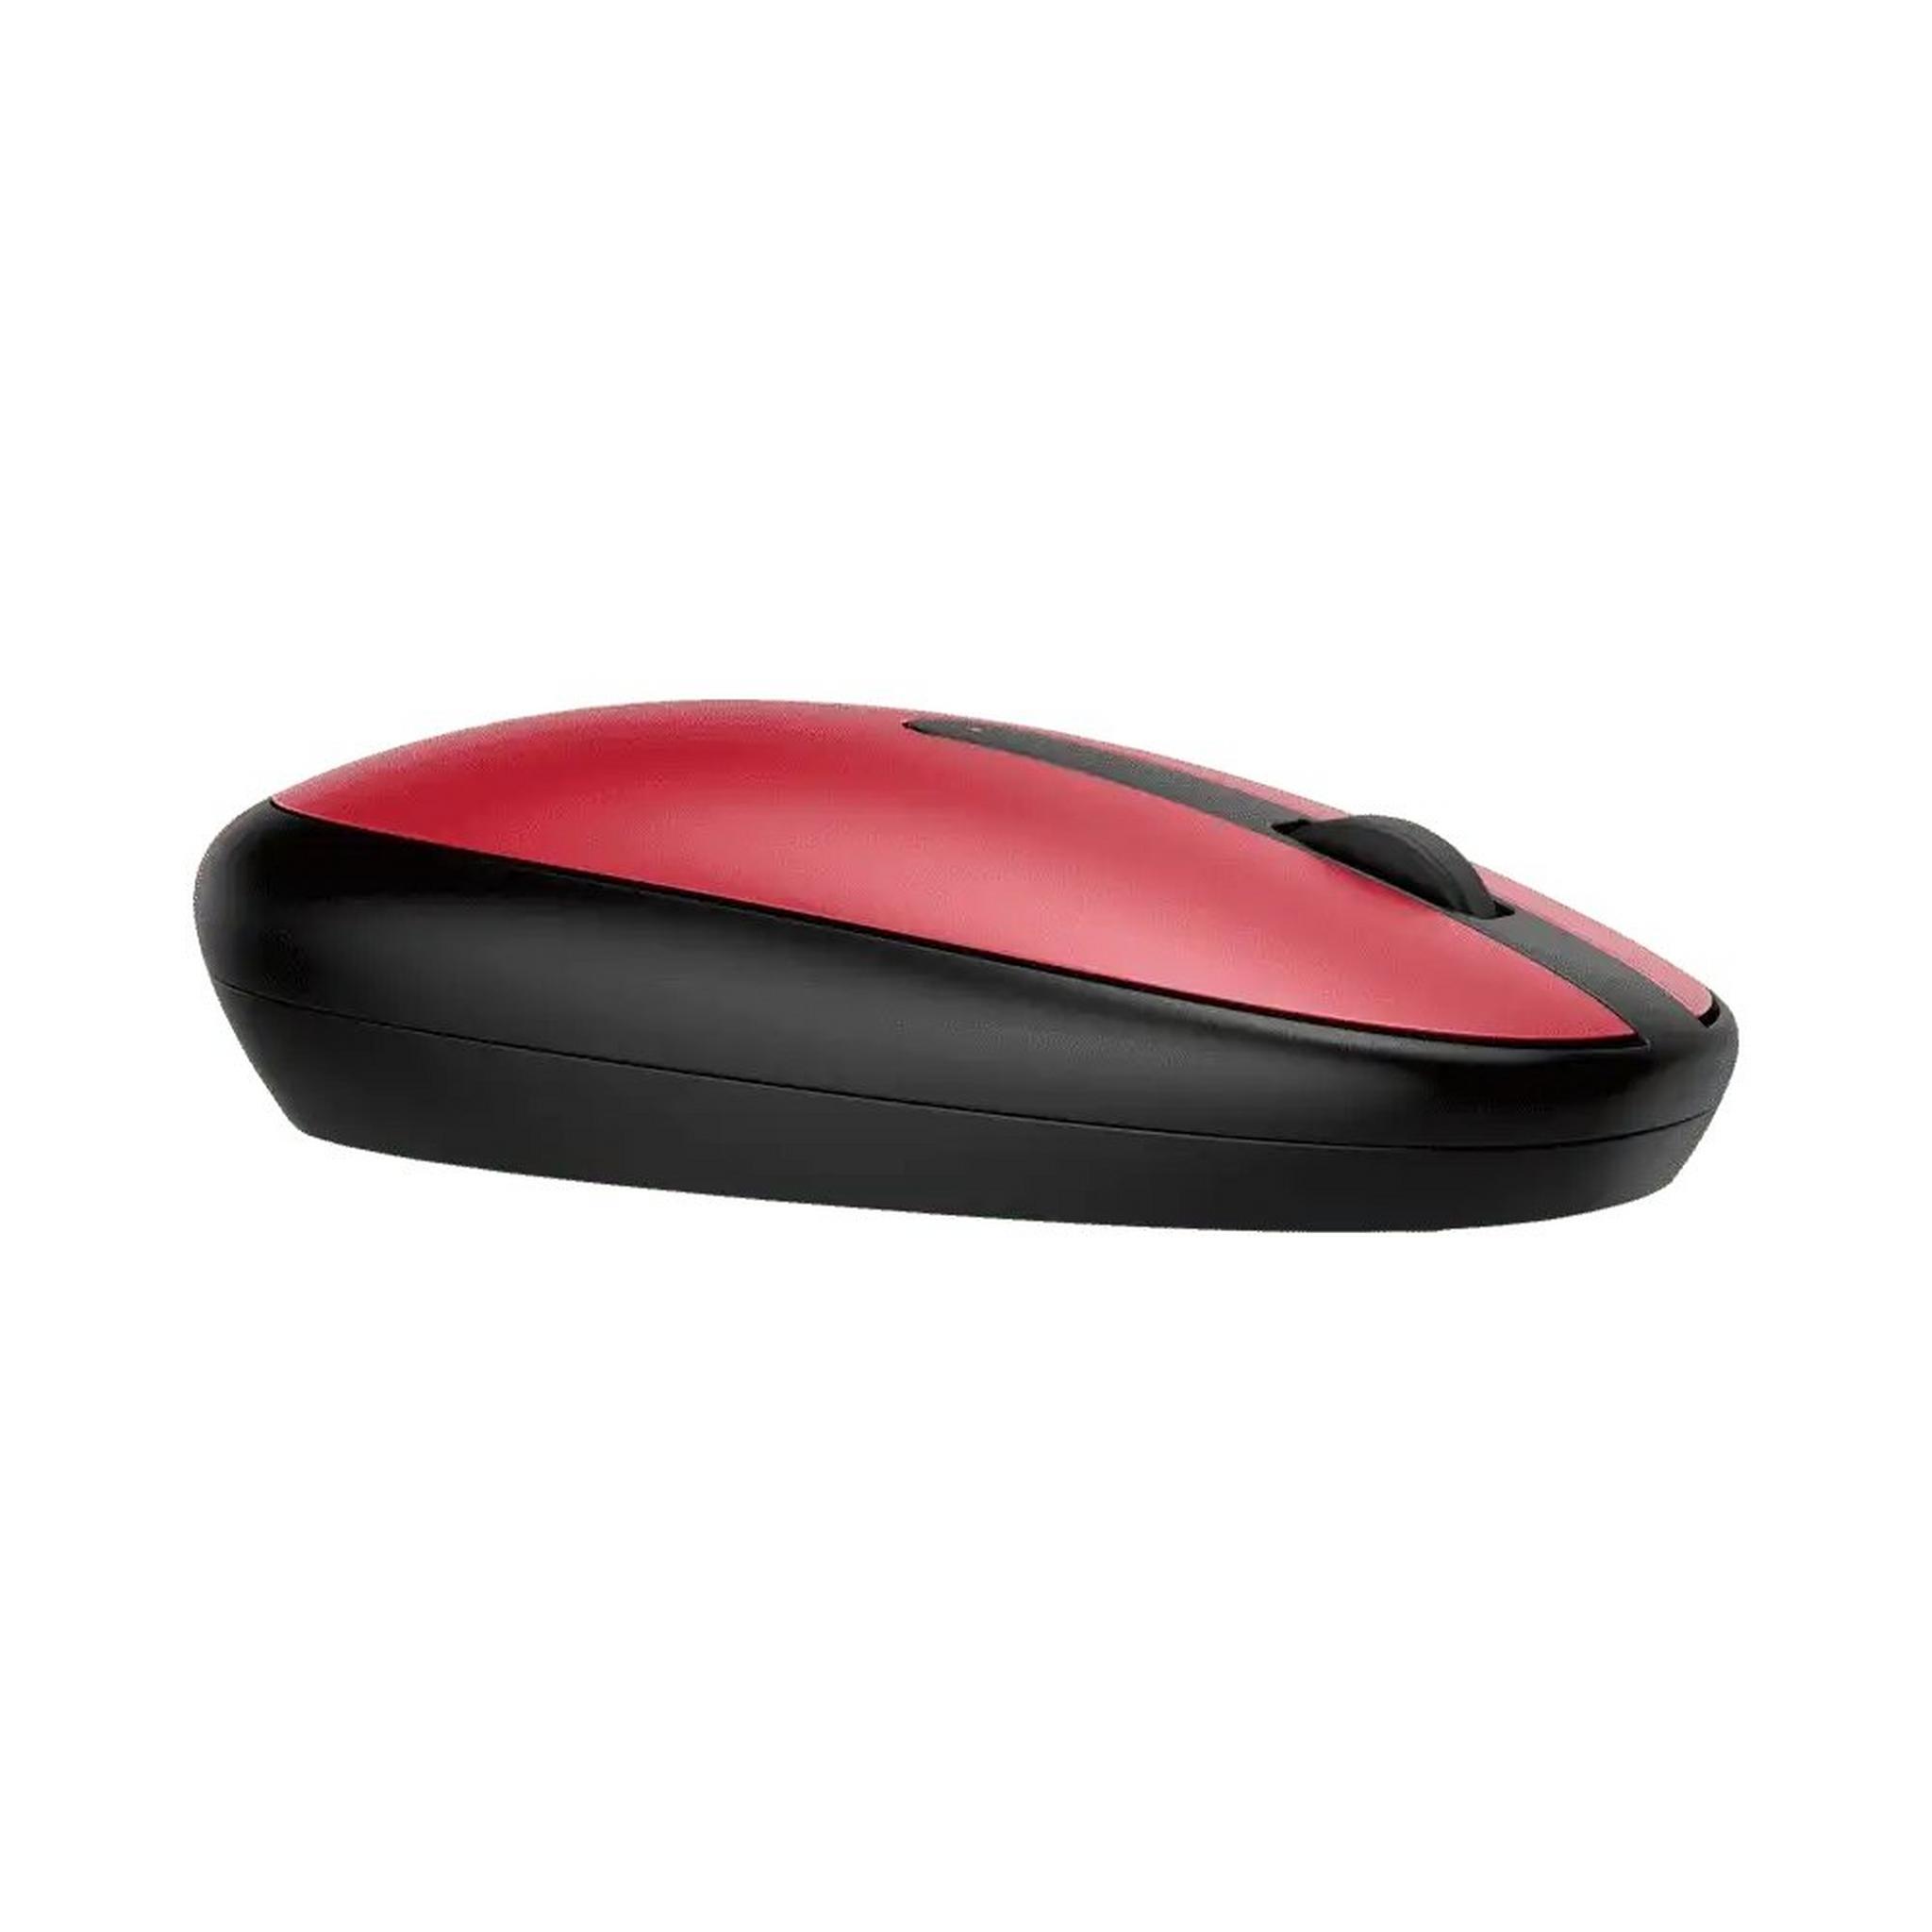 HP 240 Bluetooth Mouse - Empire Red